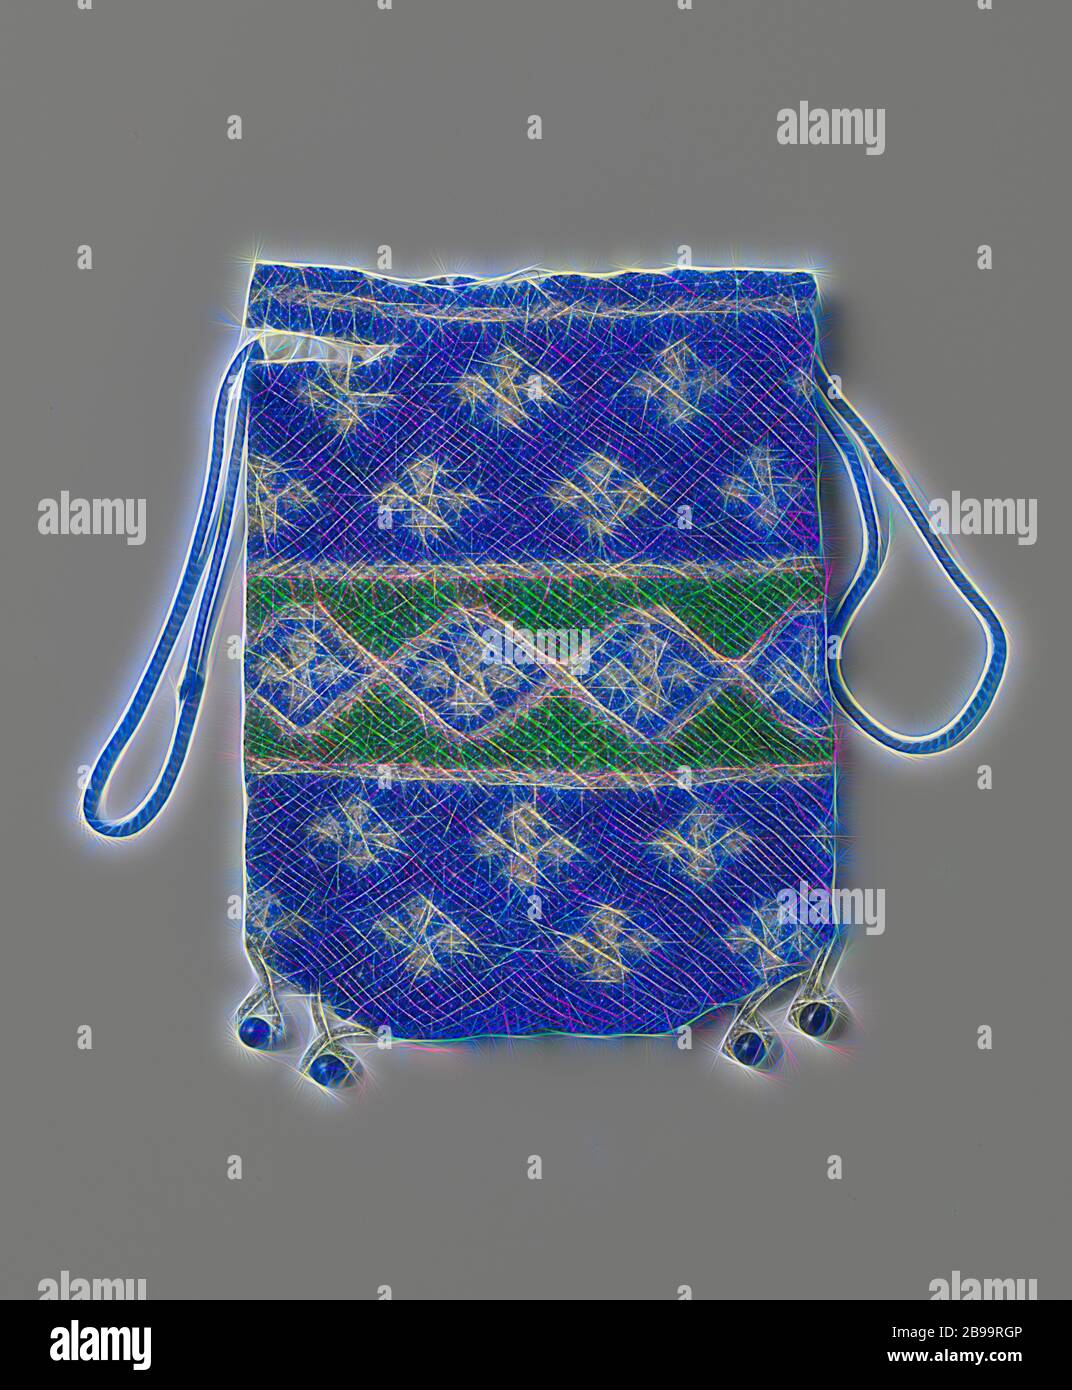 Reticule in a flat rectangular model, entirely of blue, green and